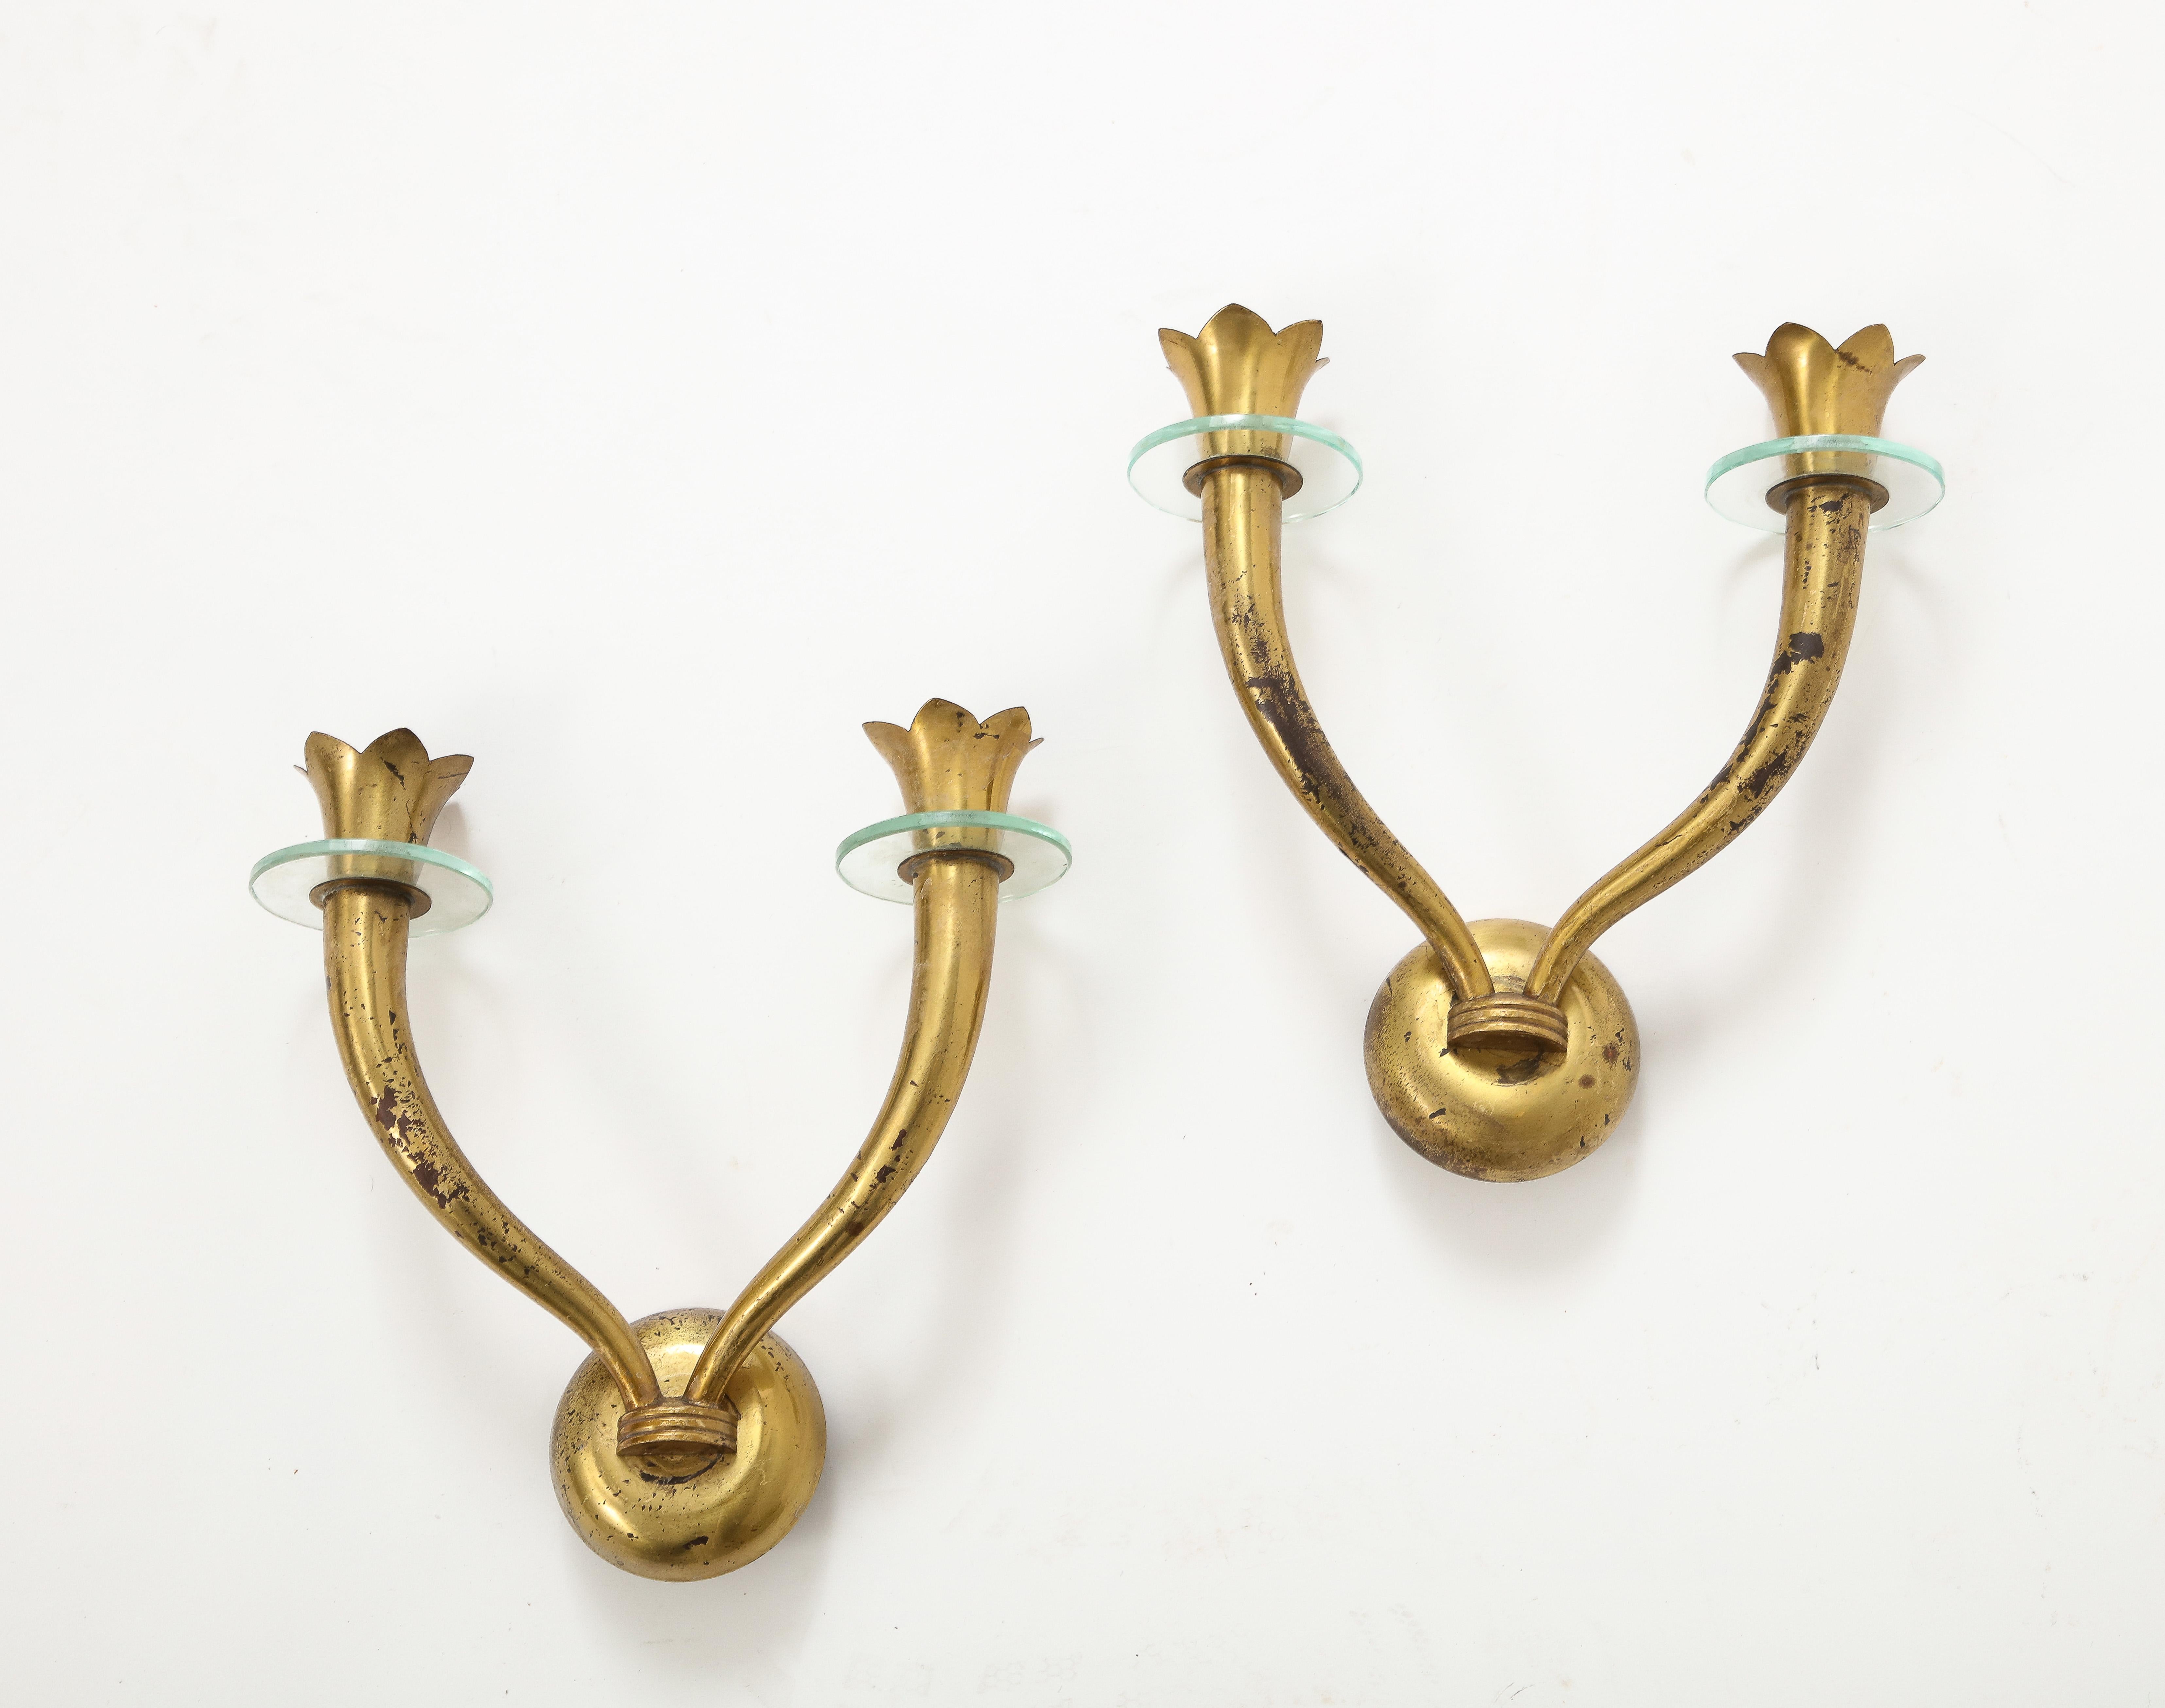 Pair of Brass and Glass Modernist Sconces Att. Emilio Lancia - Italy 1950s For Sale 4